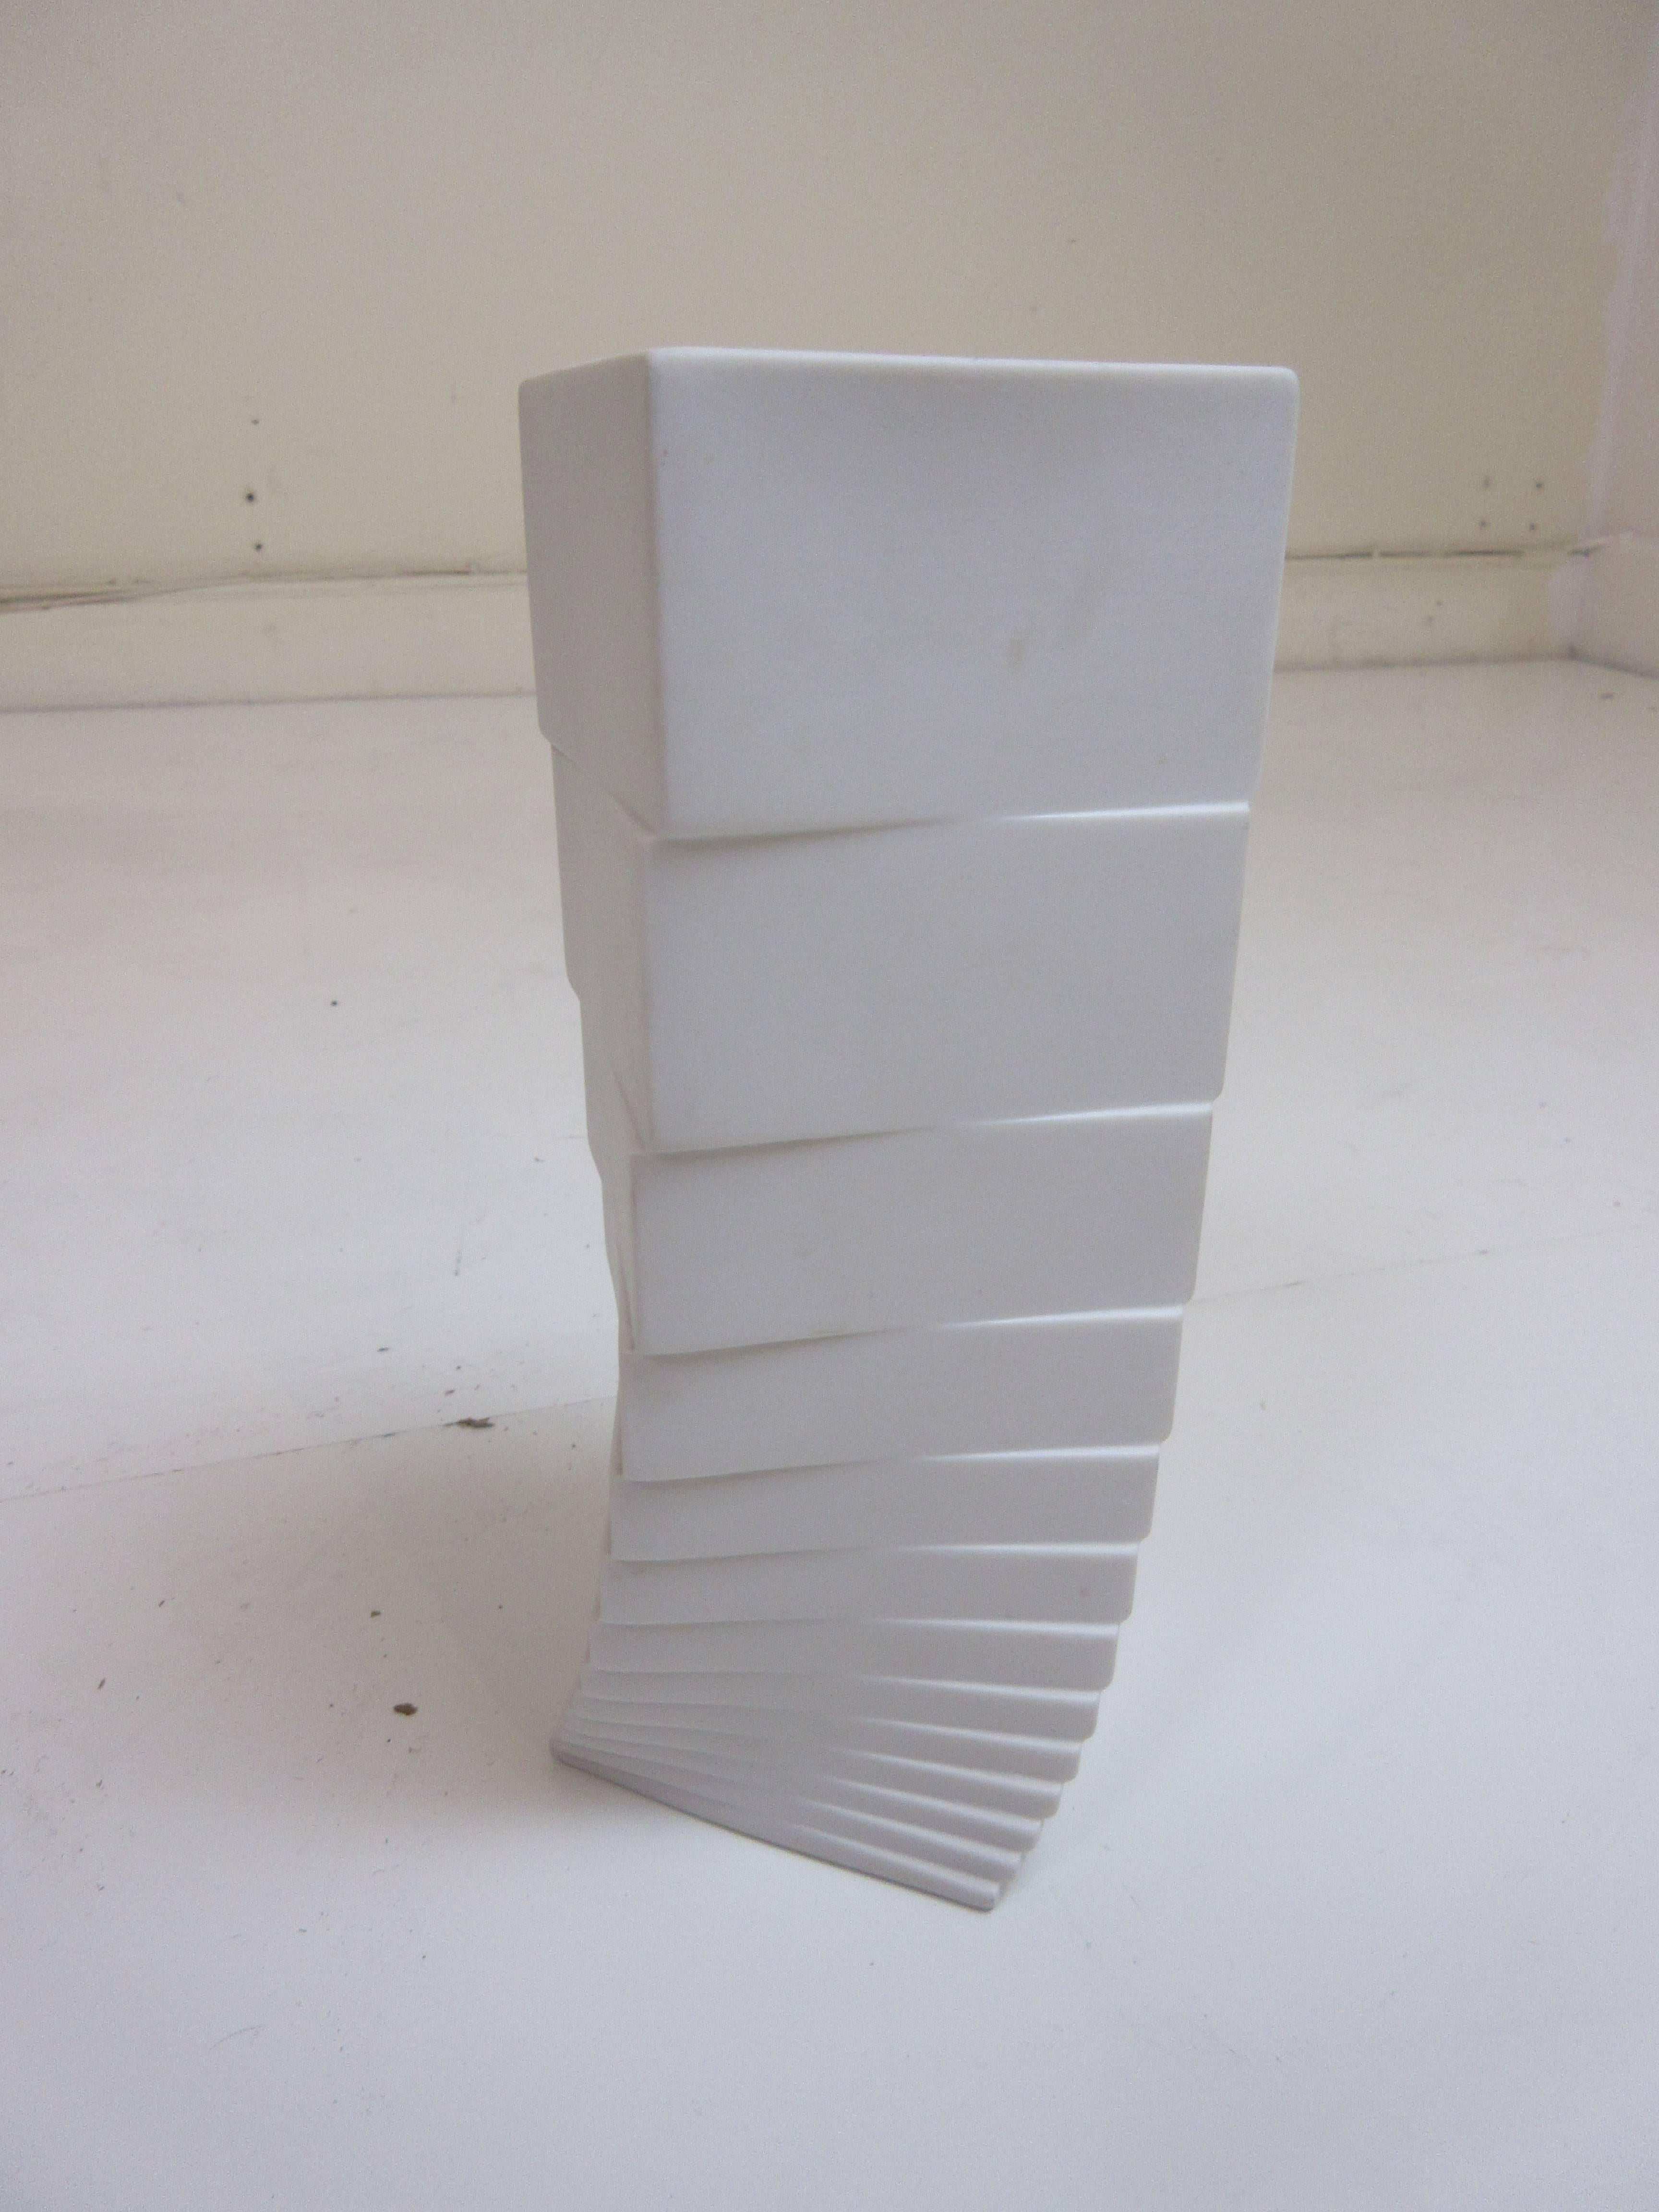 Rosenthal Studio line porcelain vase signed Hausler-Goltz. Stacked twisted cubes form the vase. The porcelain is a matte finish and it is signed in script and block letters,.